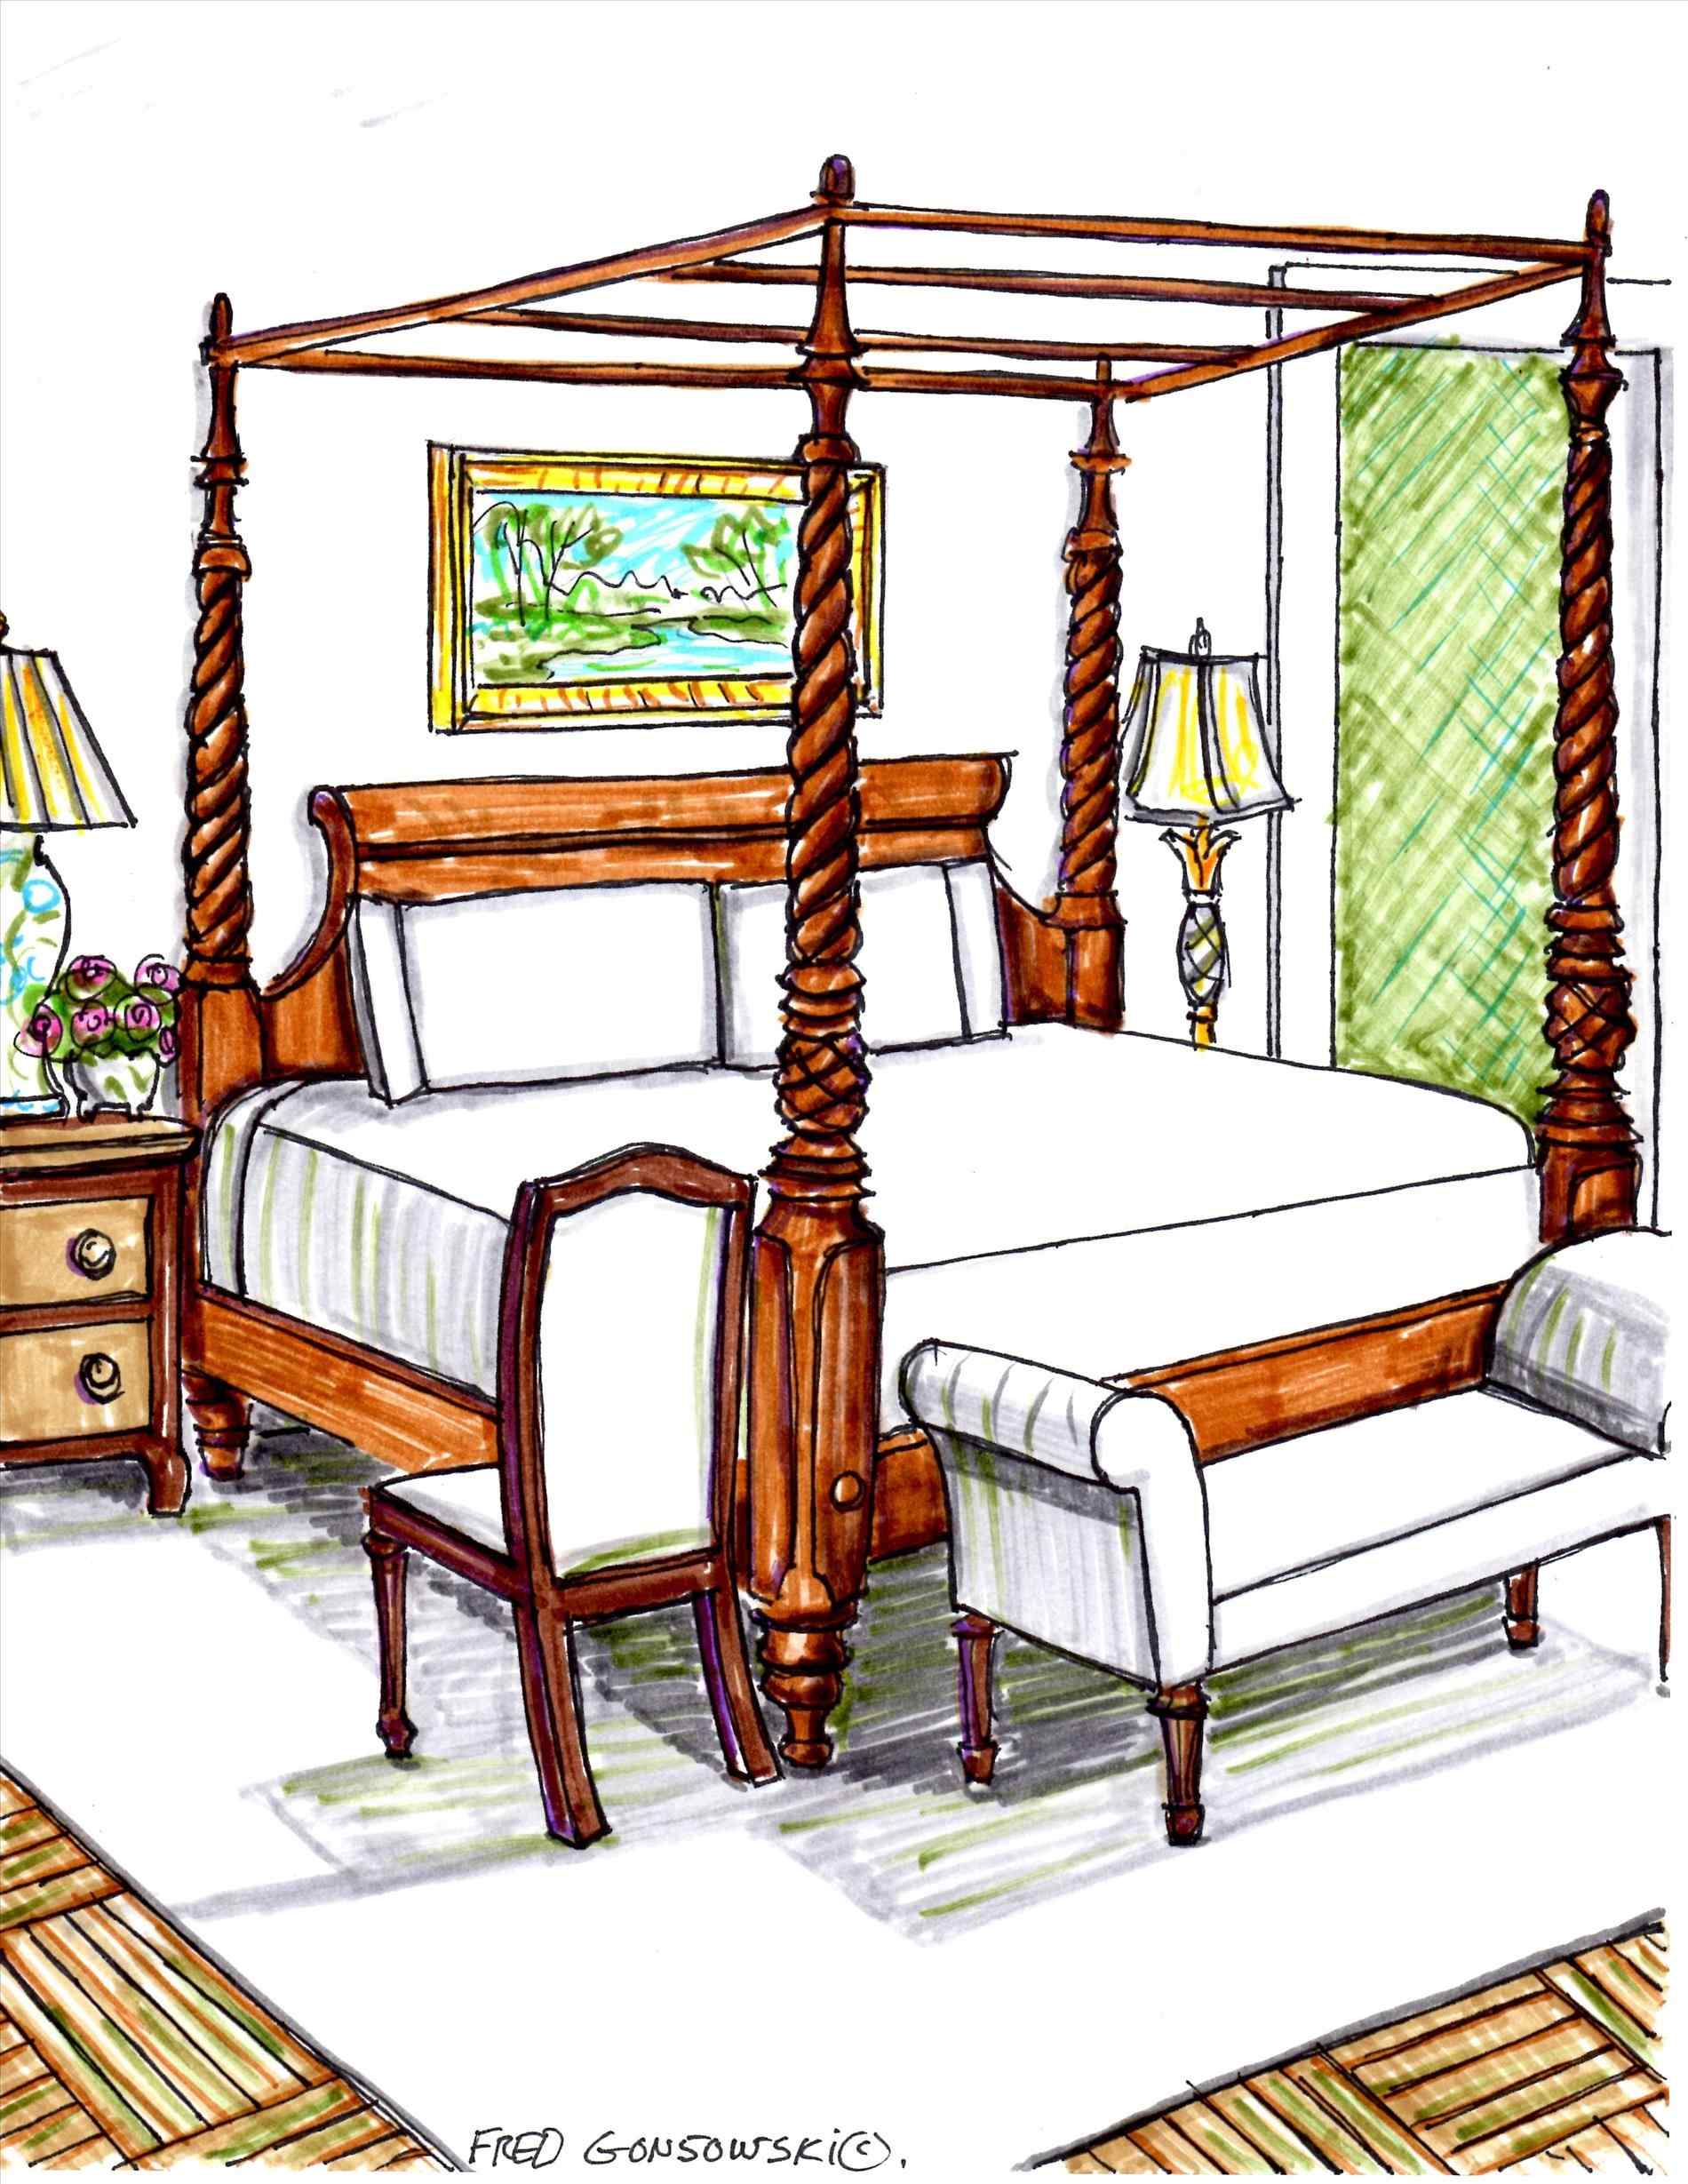 bed clipart furniture